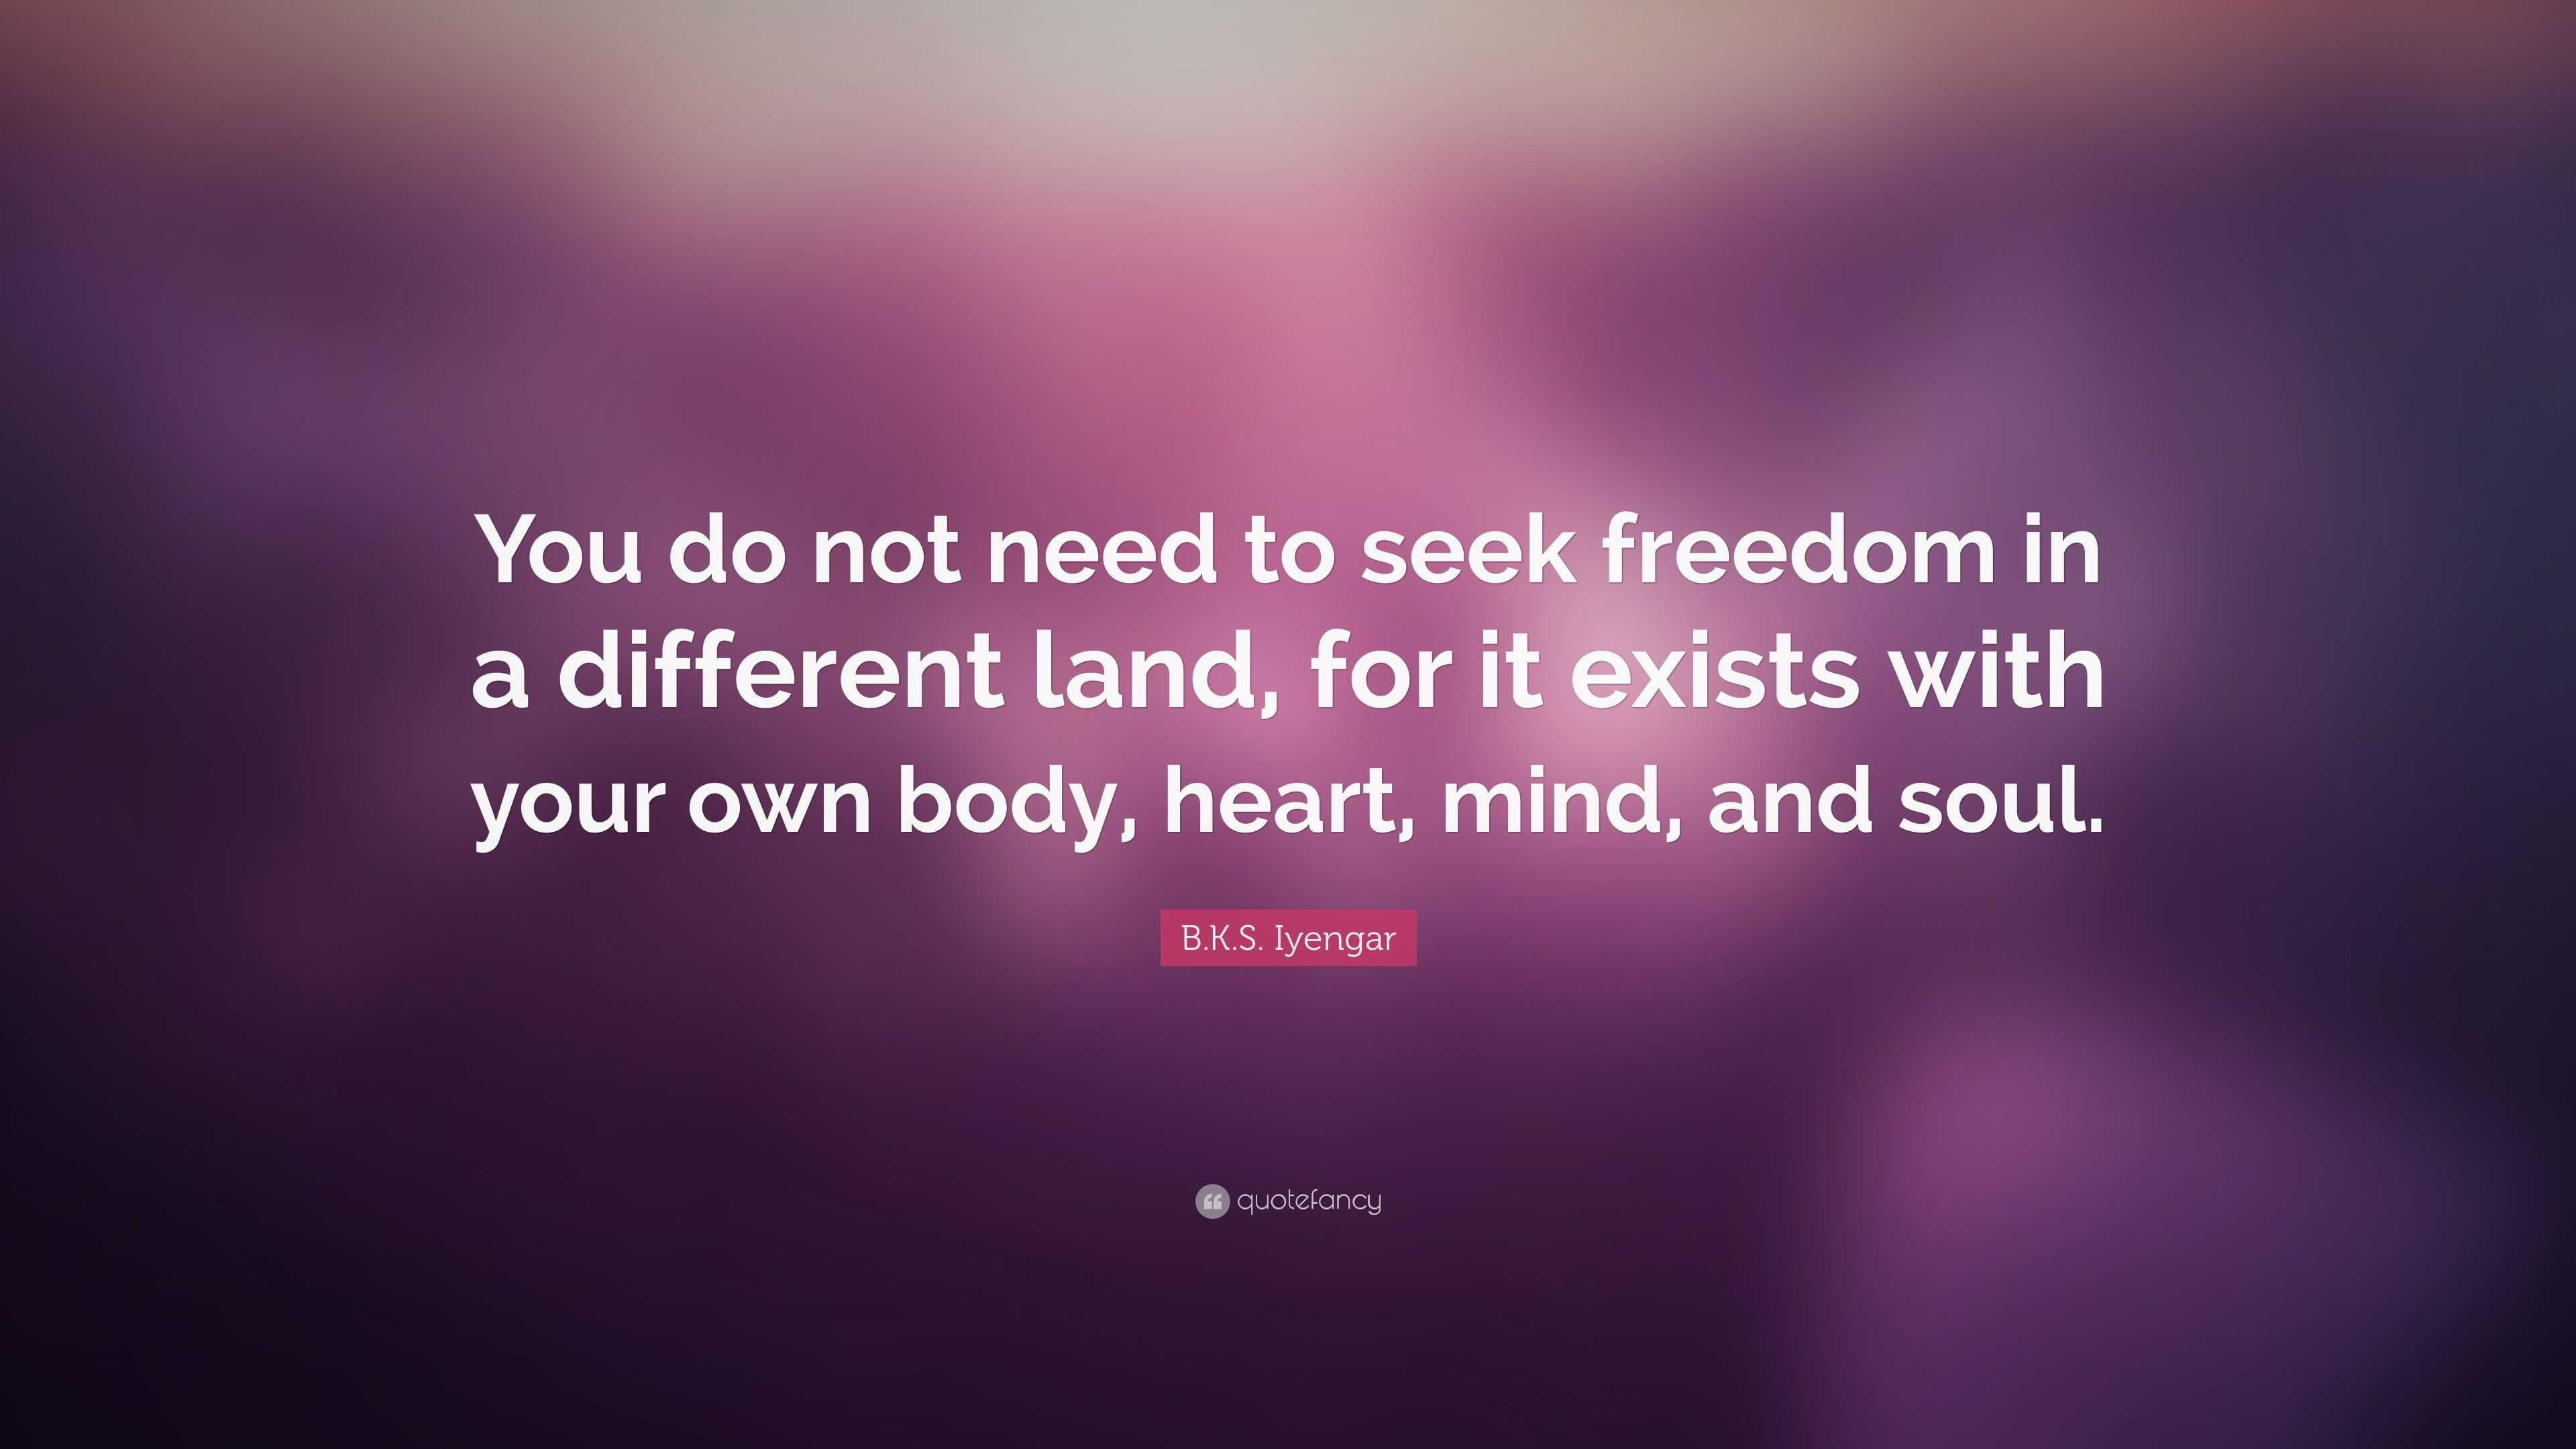 B.K.S. Iyengar Quote: “You do not need to seek freedom in a different ...